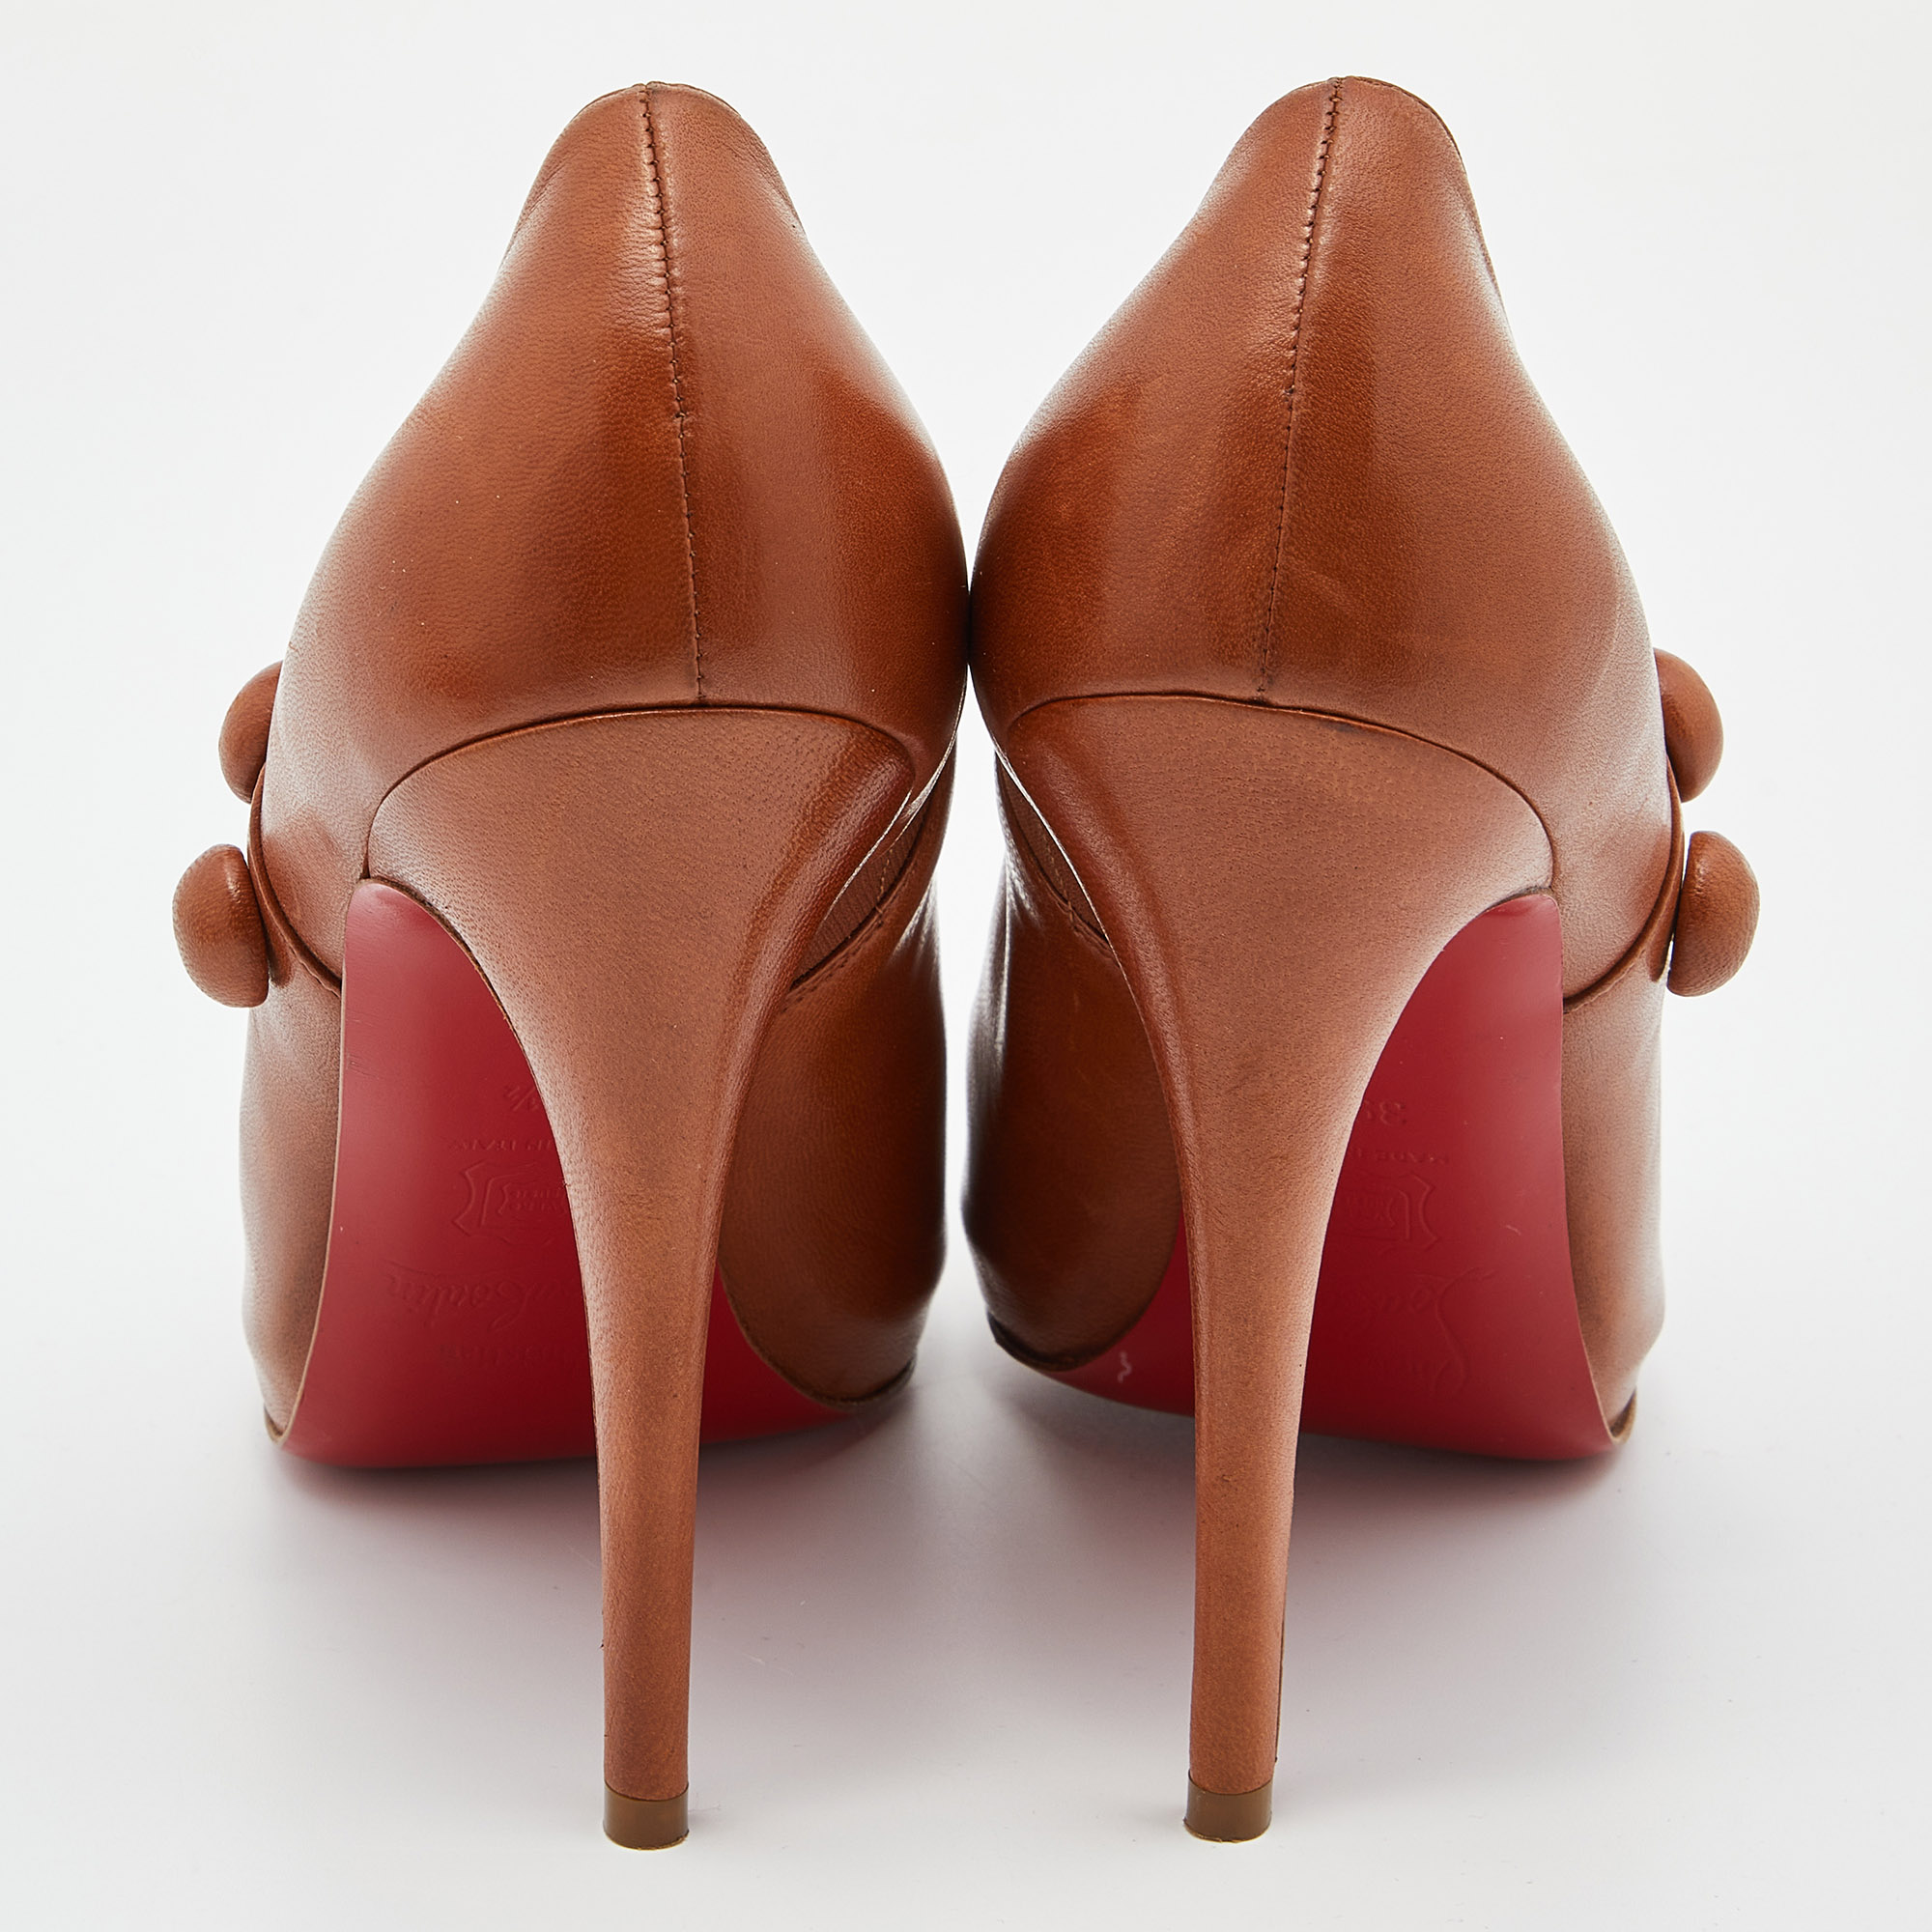 Christian Louboutin Tan Leather C'est Moi Ankle Booties Size 39.5